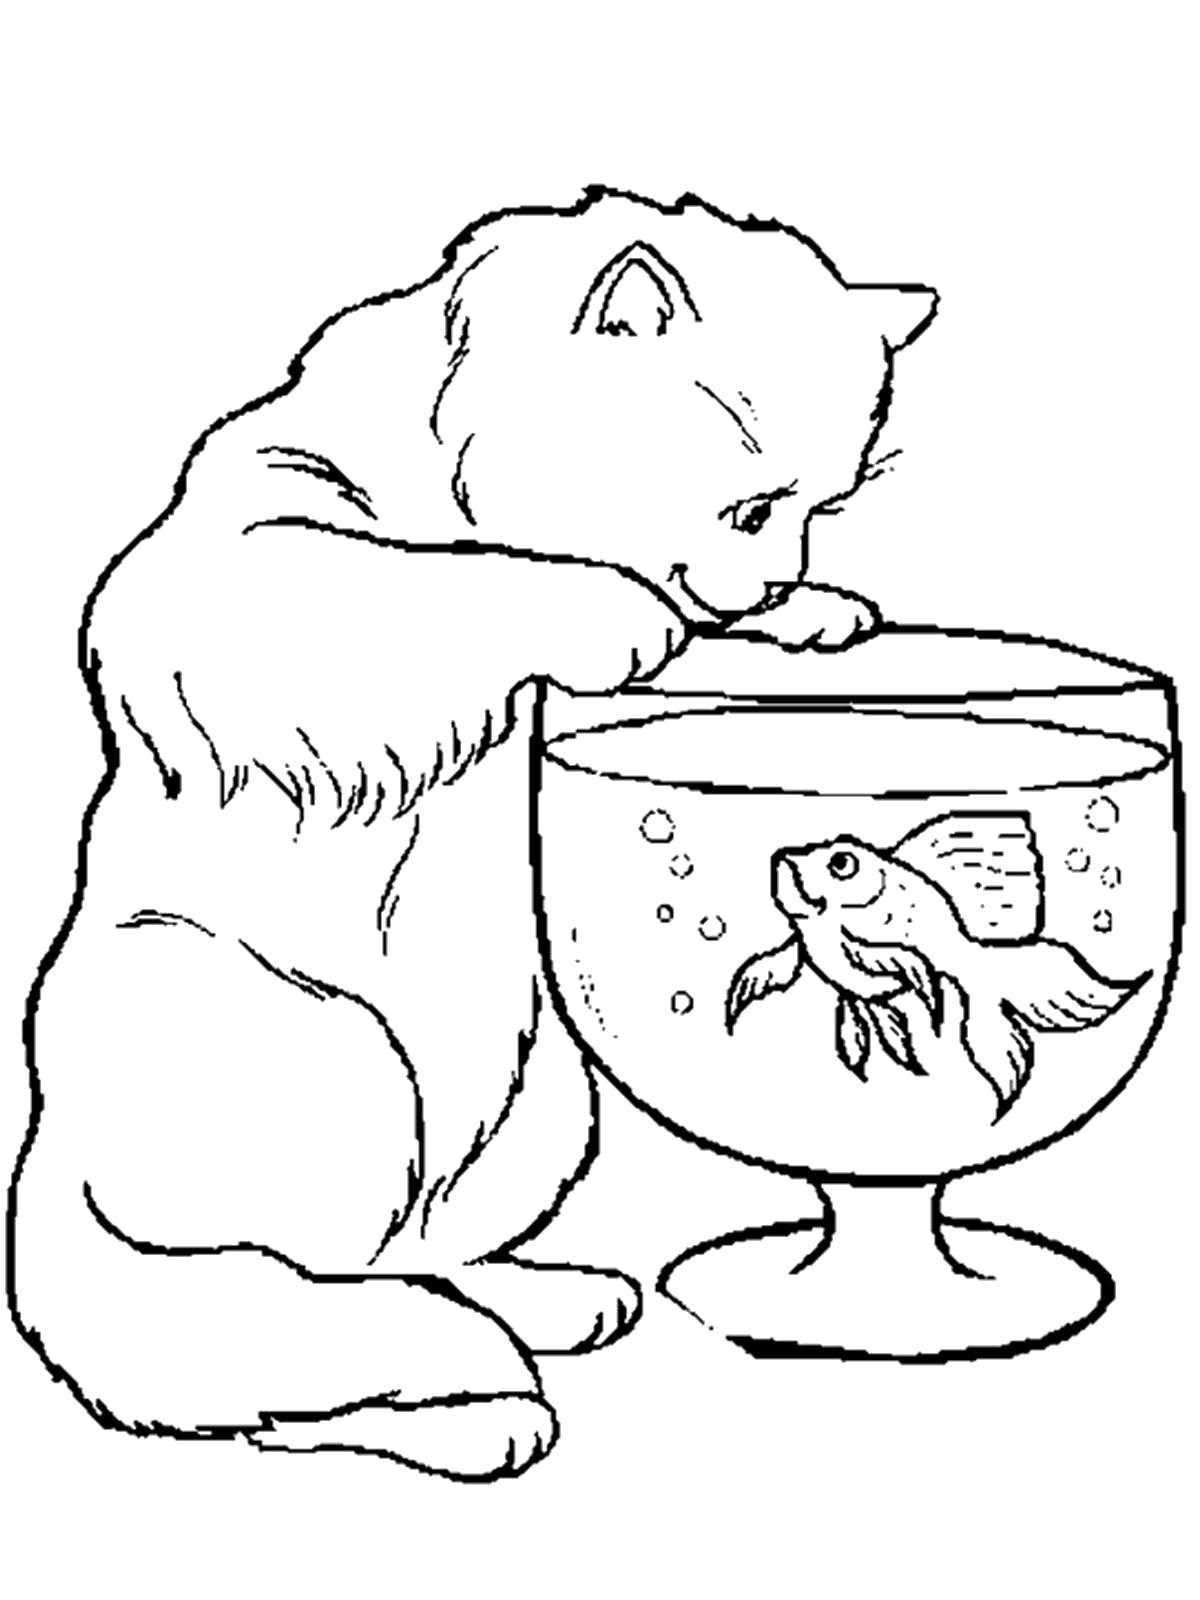 Coloring The cat with the fish in the aquarium. Category Pets allowed. Tags:  cat, aquarium, fish.